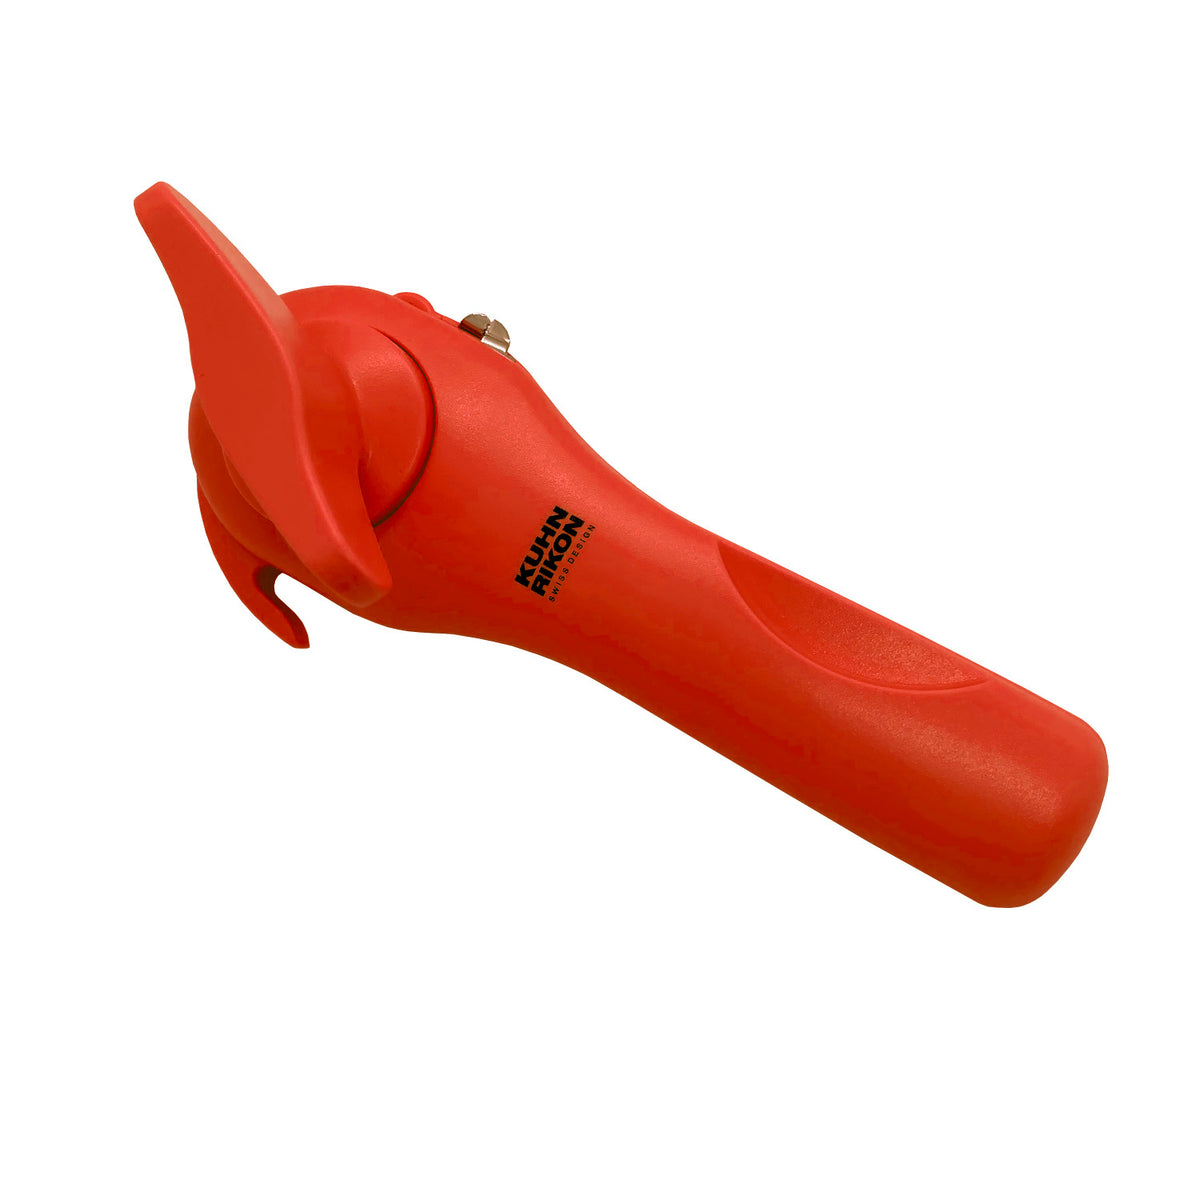 Kuhn Rikon Slim Safety Lid Lifter Can Opener, White